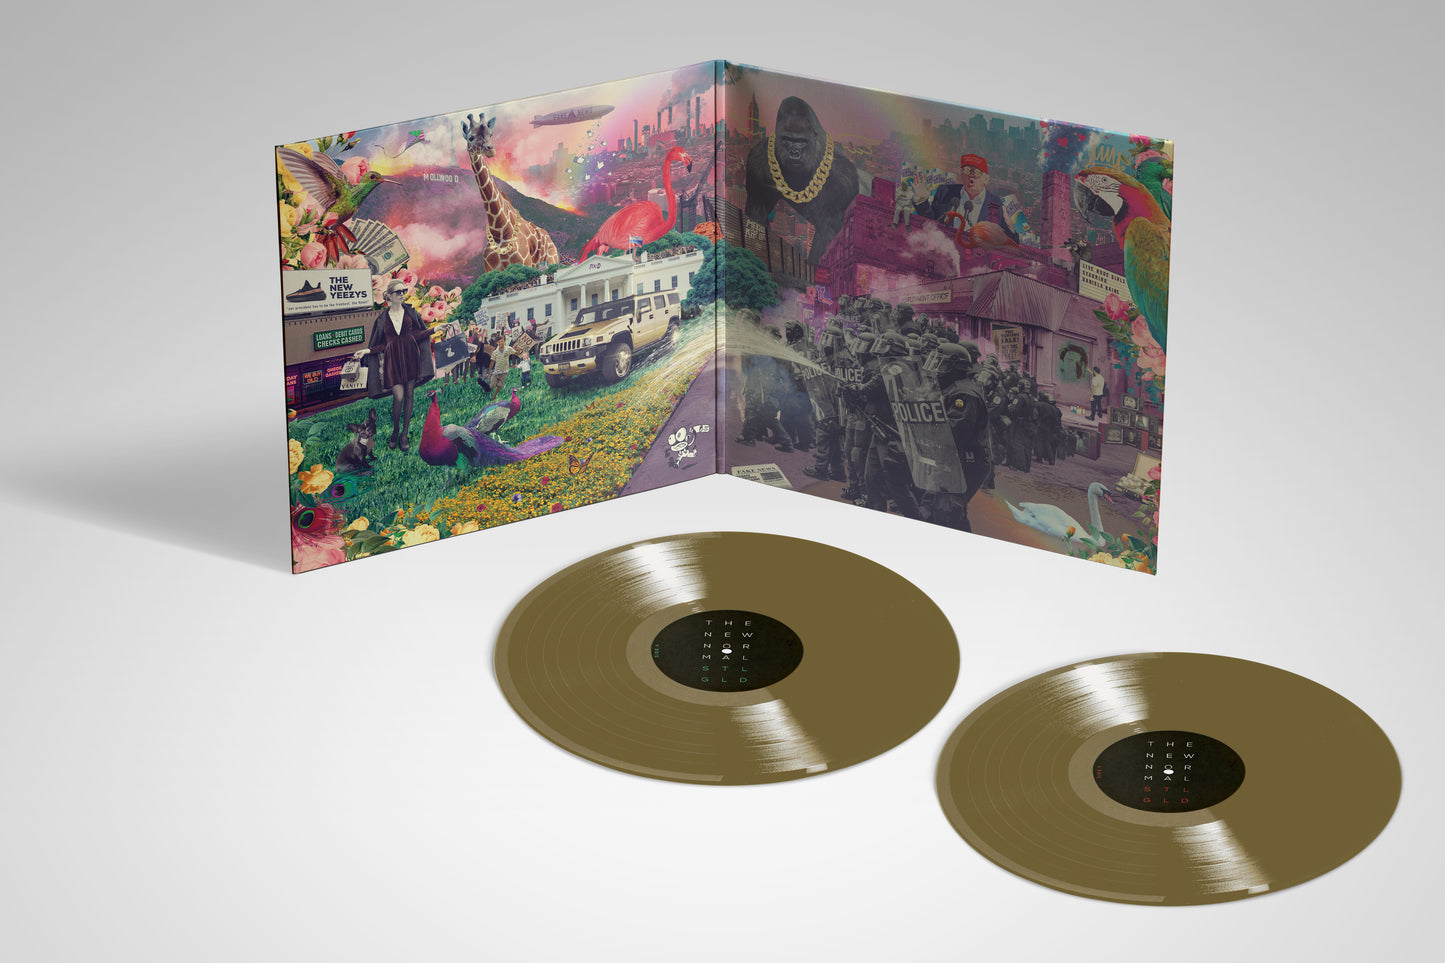 STL GLD – The New Normal Deluxe Vinyl